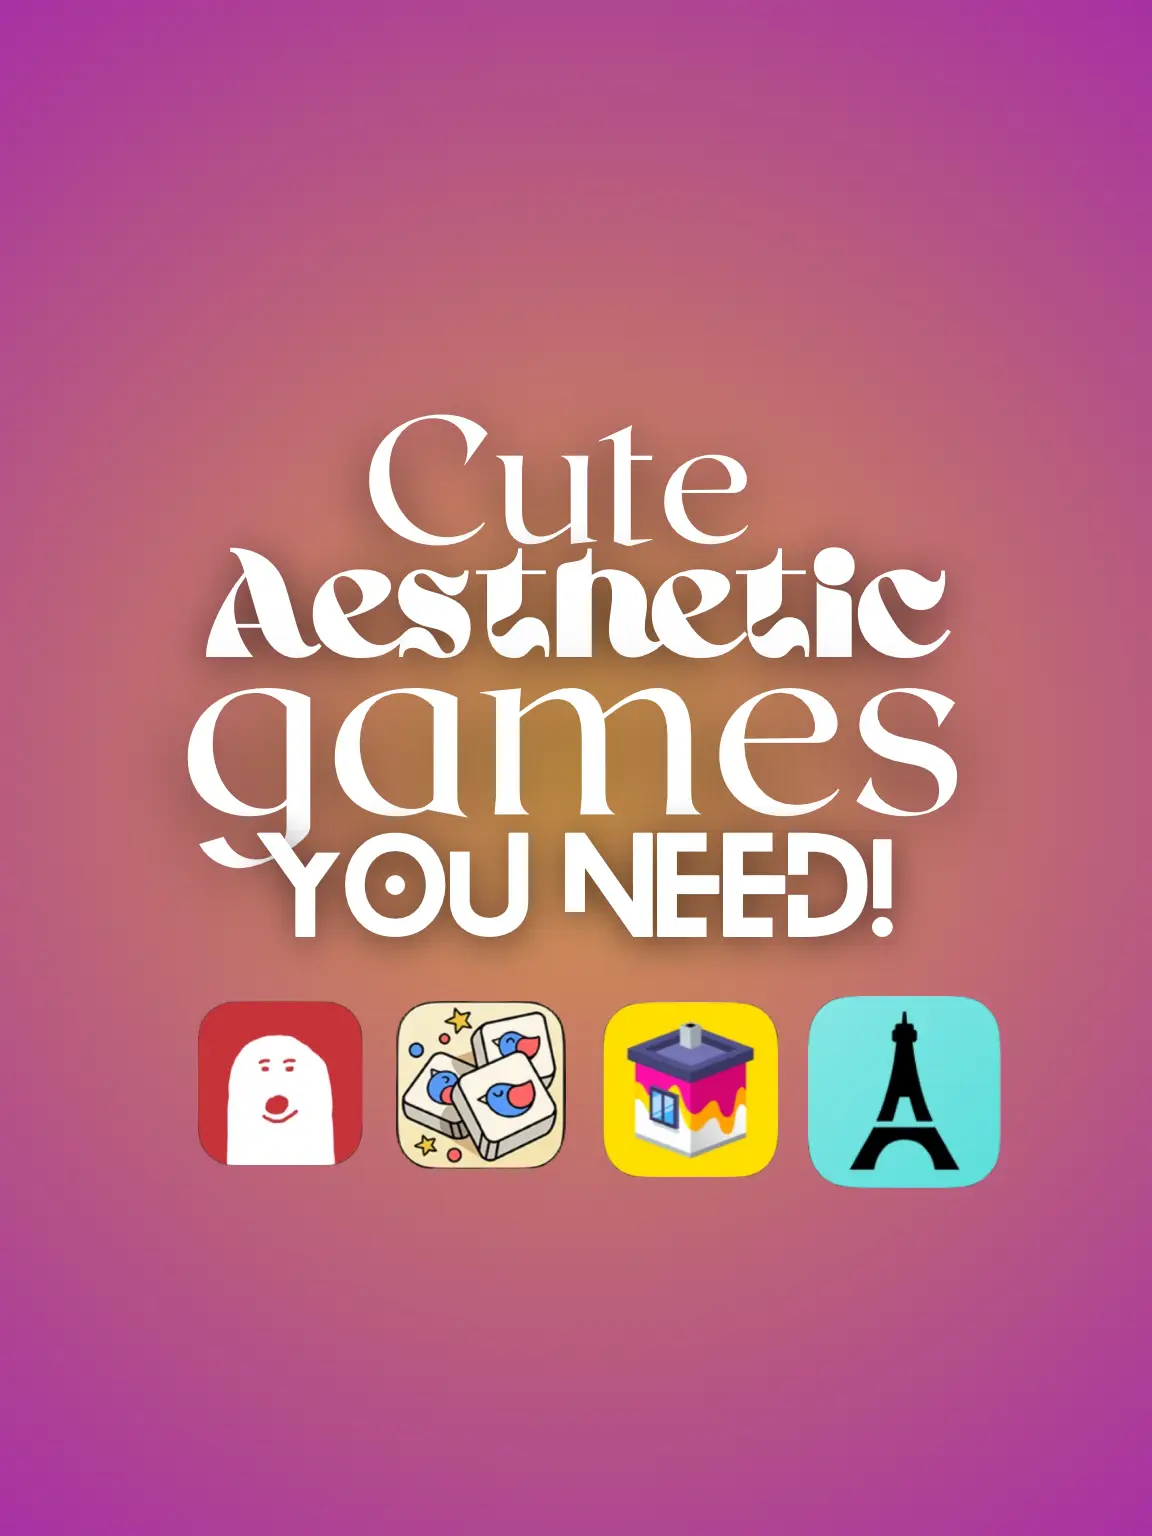 CUTE, AESTHETIC, FUN games to kill boredom 🫧💗's images